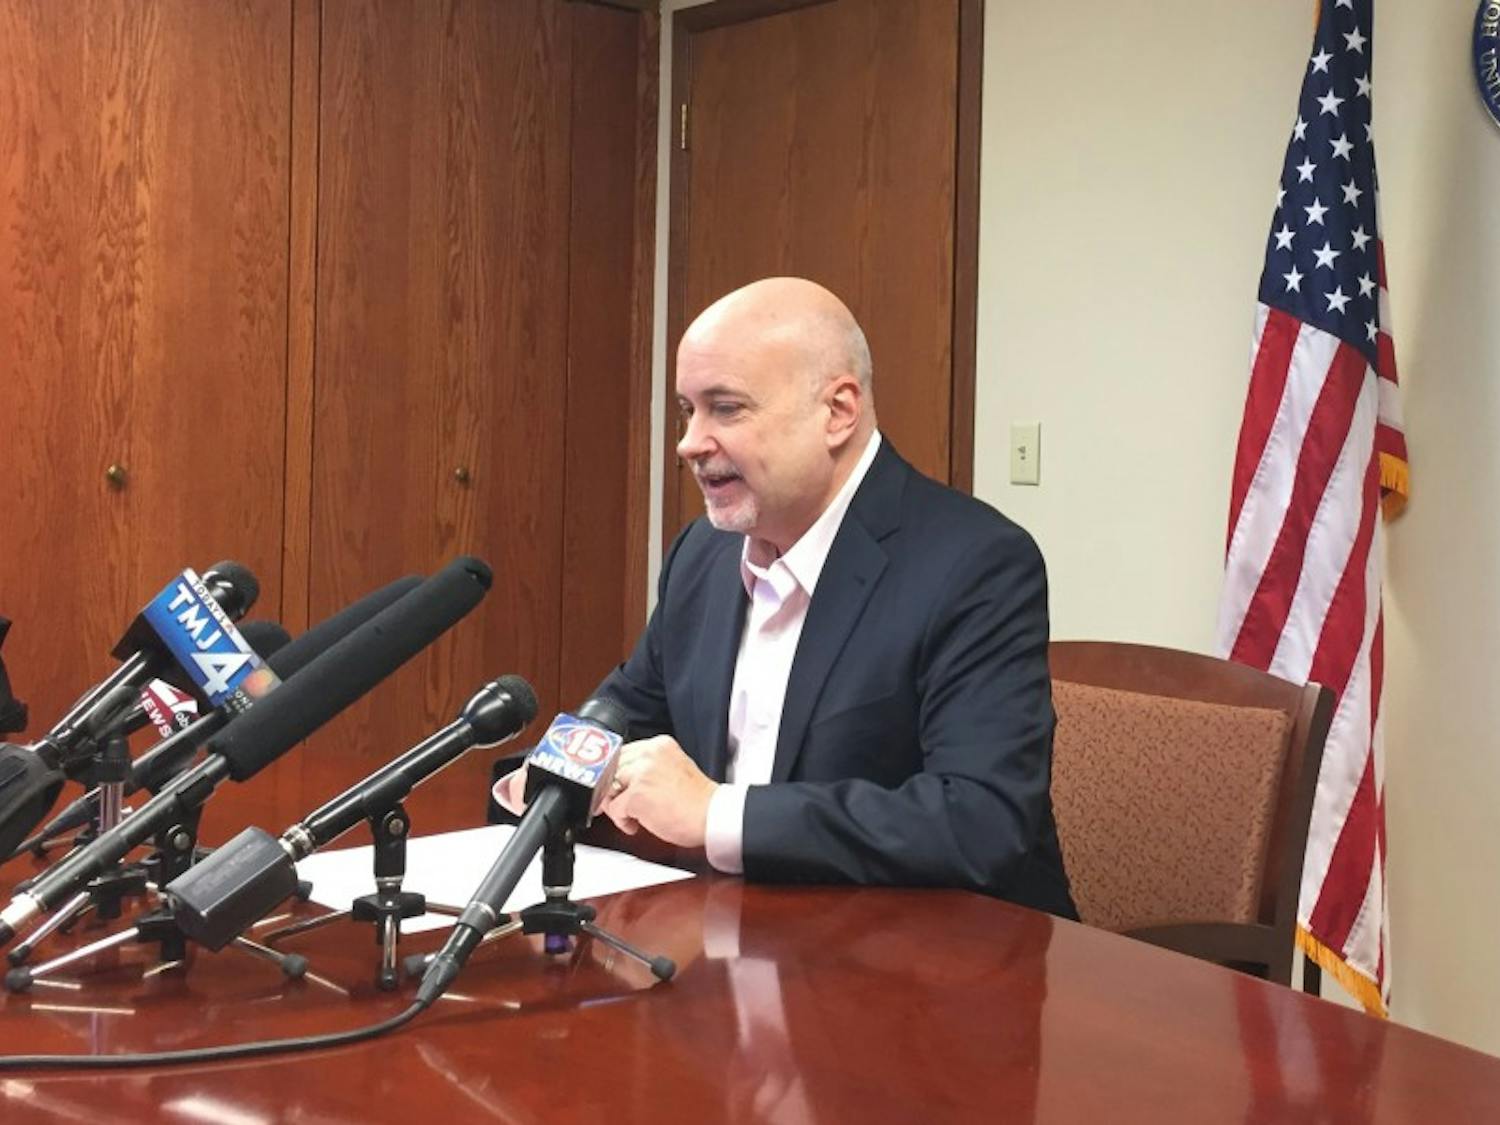 U.S. Rep. Mark Pocan, D-Wis., announced he will not be attending President-elect Donald Trump’s inauguration and that he would be attending the Women’s March in Madison the following day.